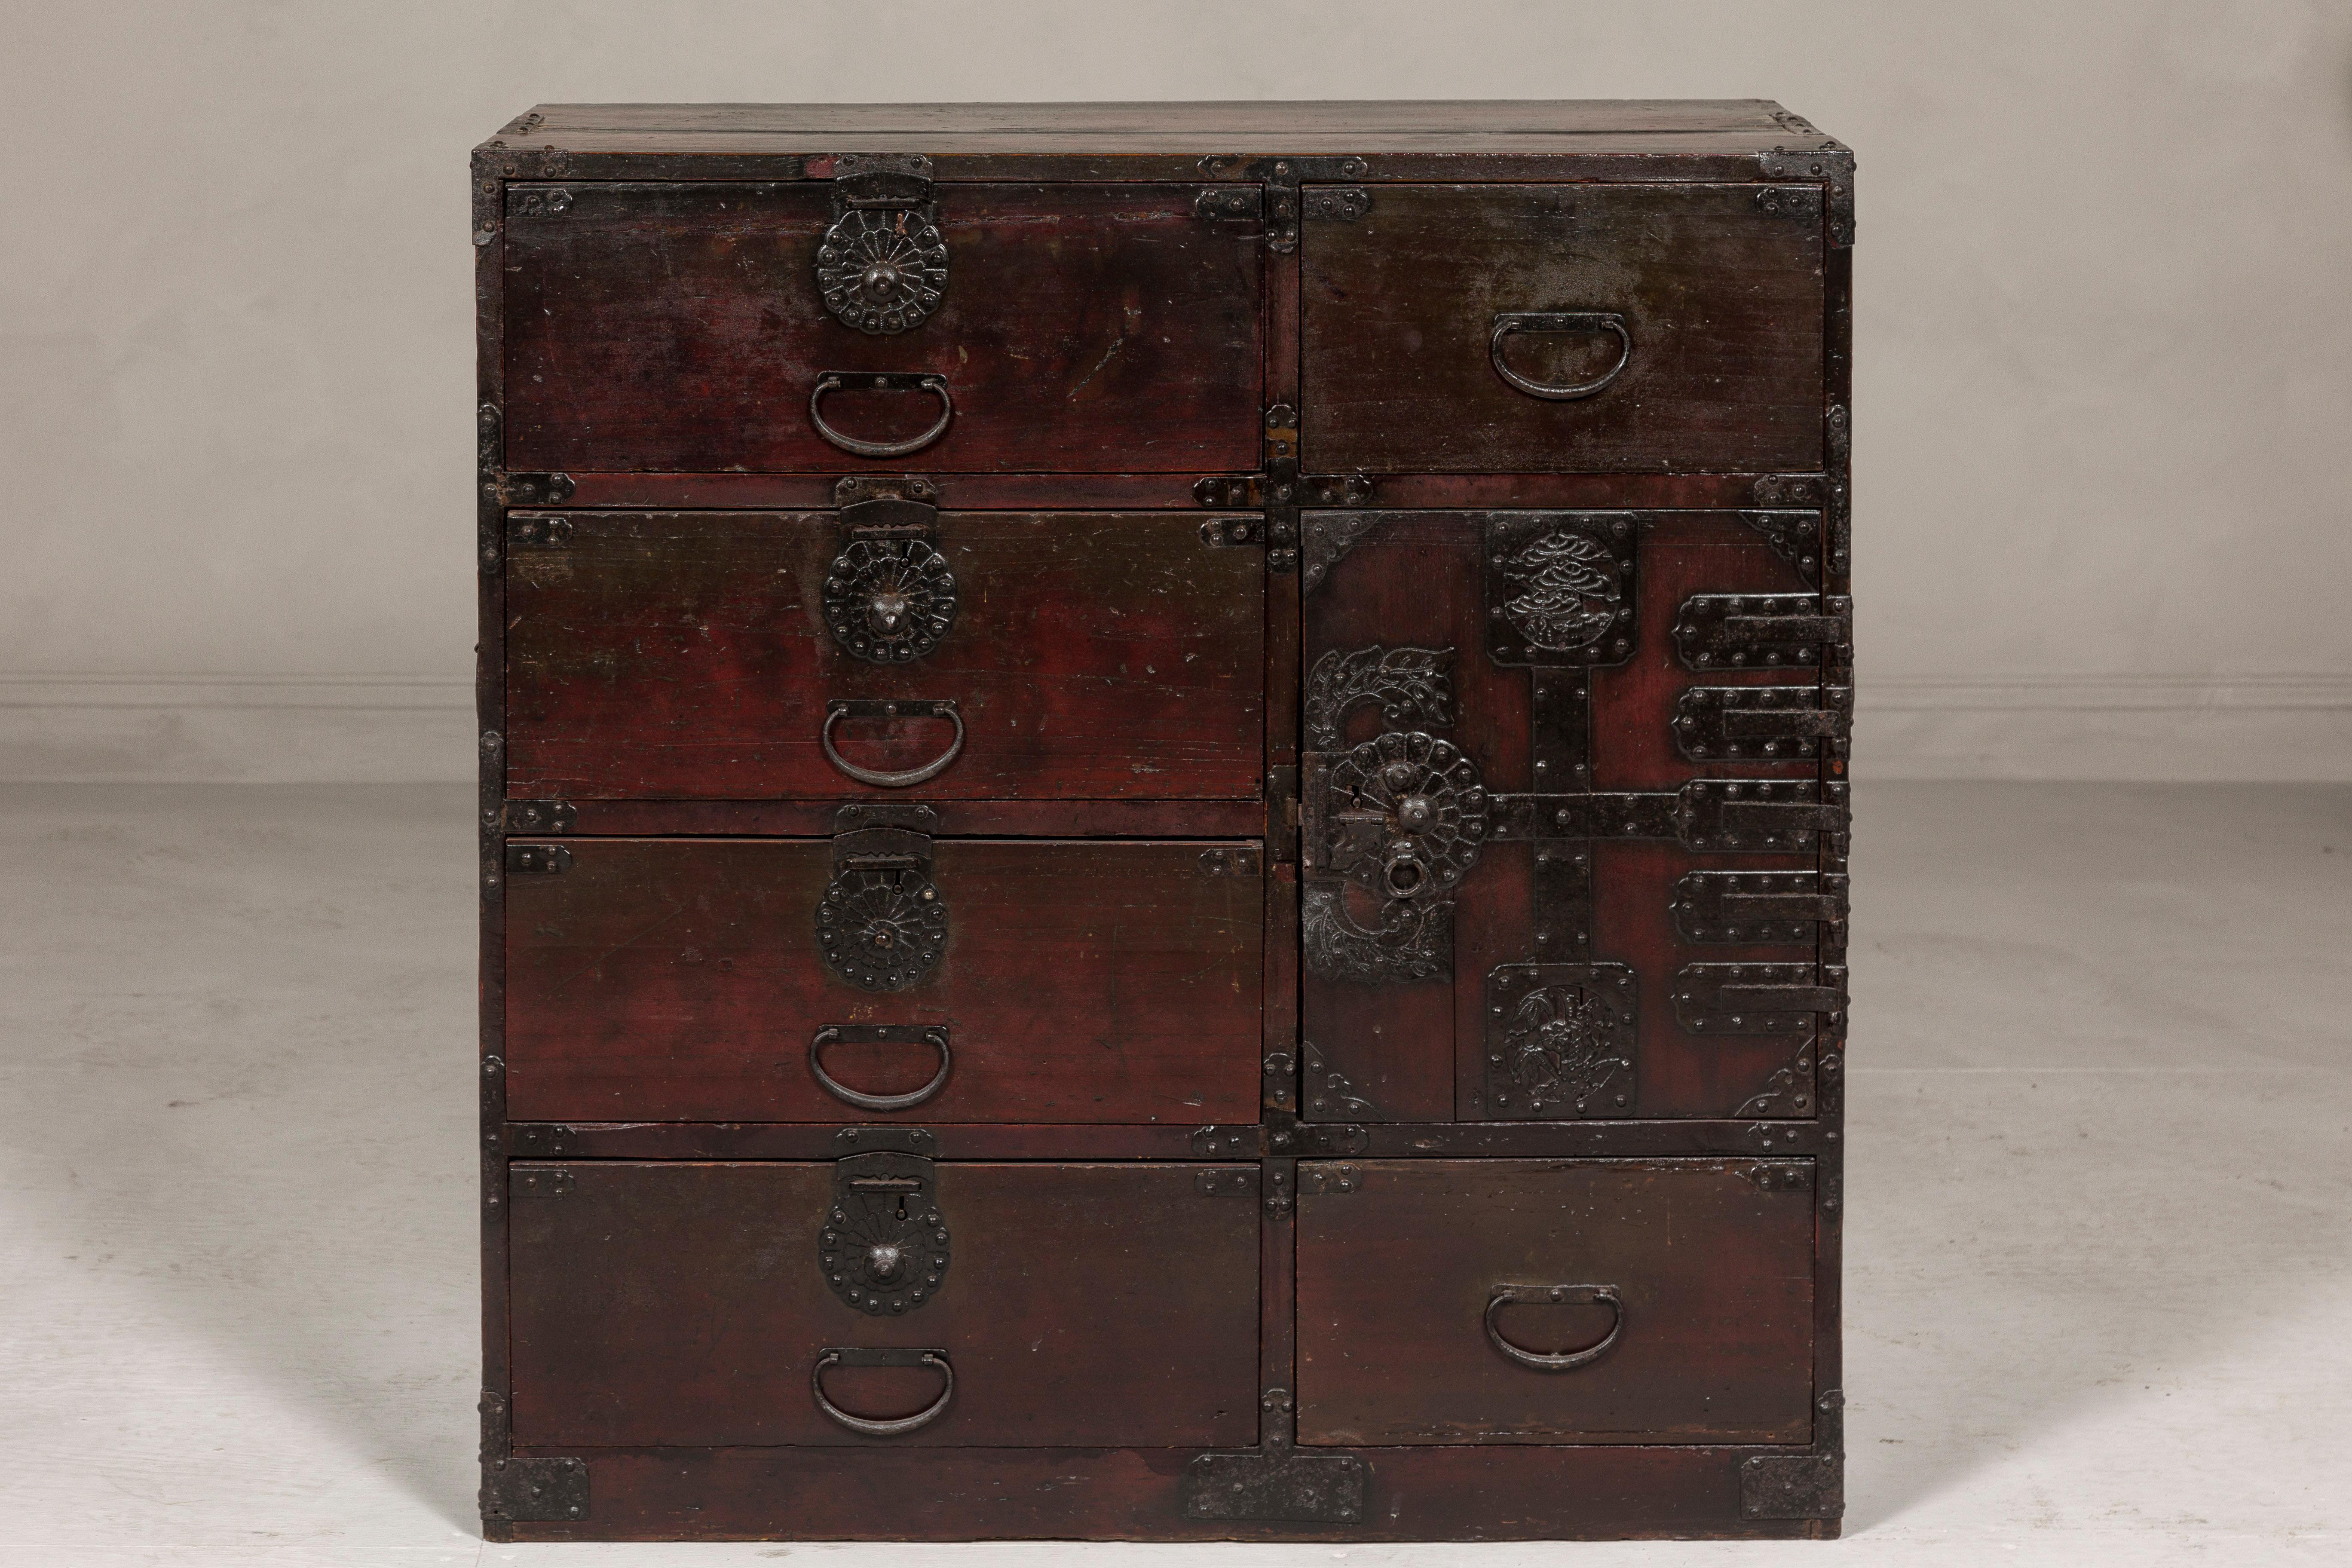 Lacquered Japanese Meiji Period 19th Century Sendai Type Tansu Chest with Drawers and Safe For Sale